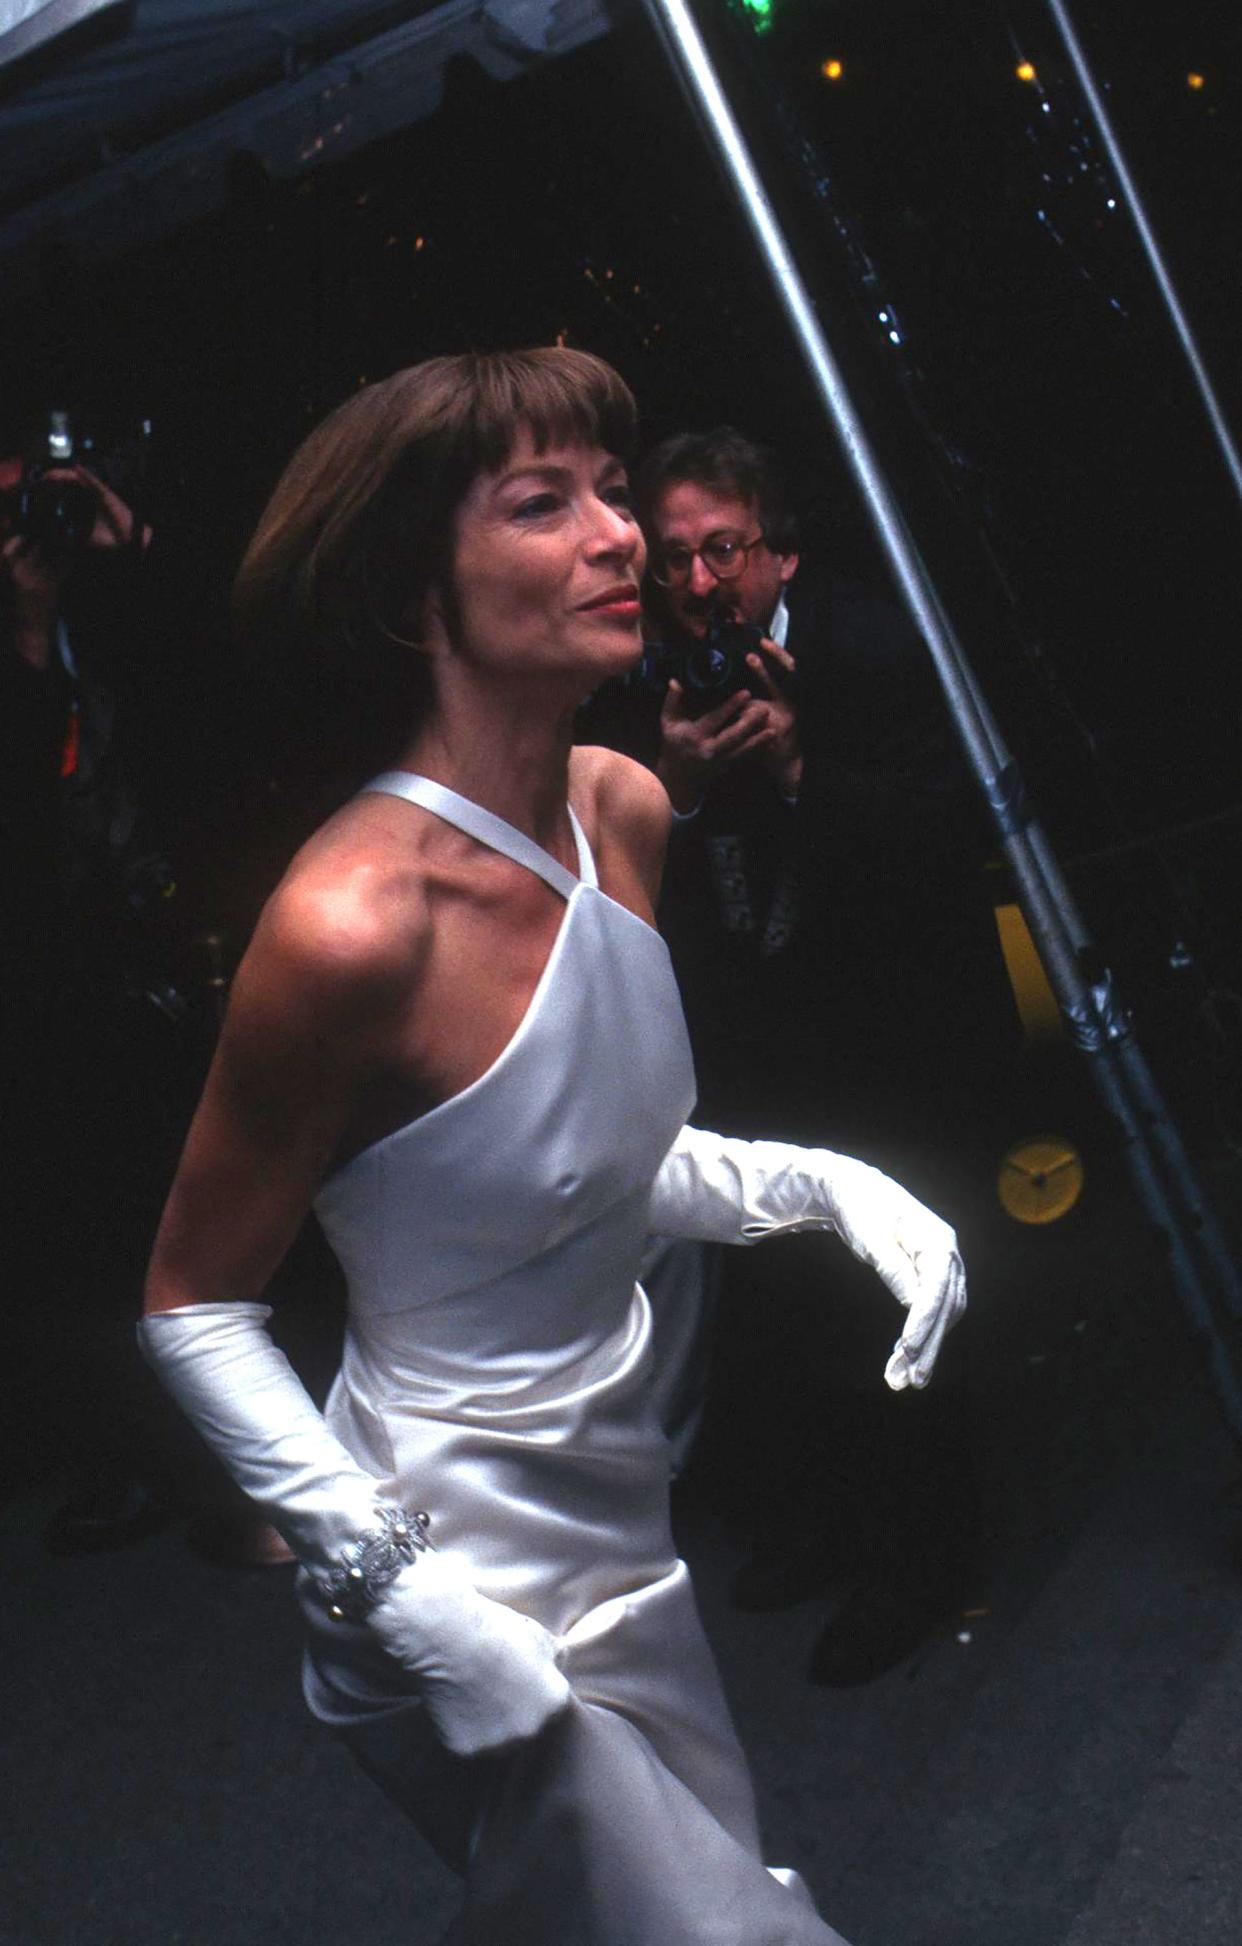 Anna Wintour arrives at the 1995 Met Gala in a white gown with elbow length gloves.